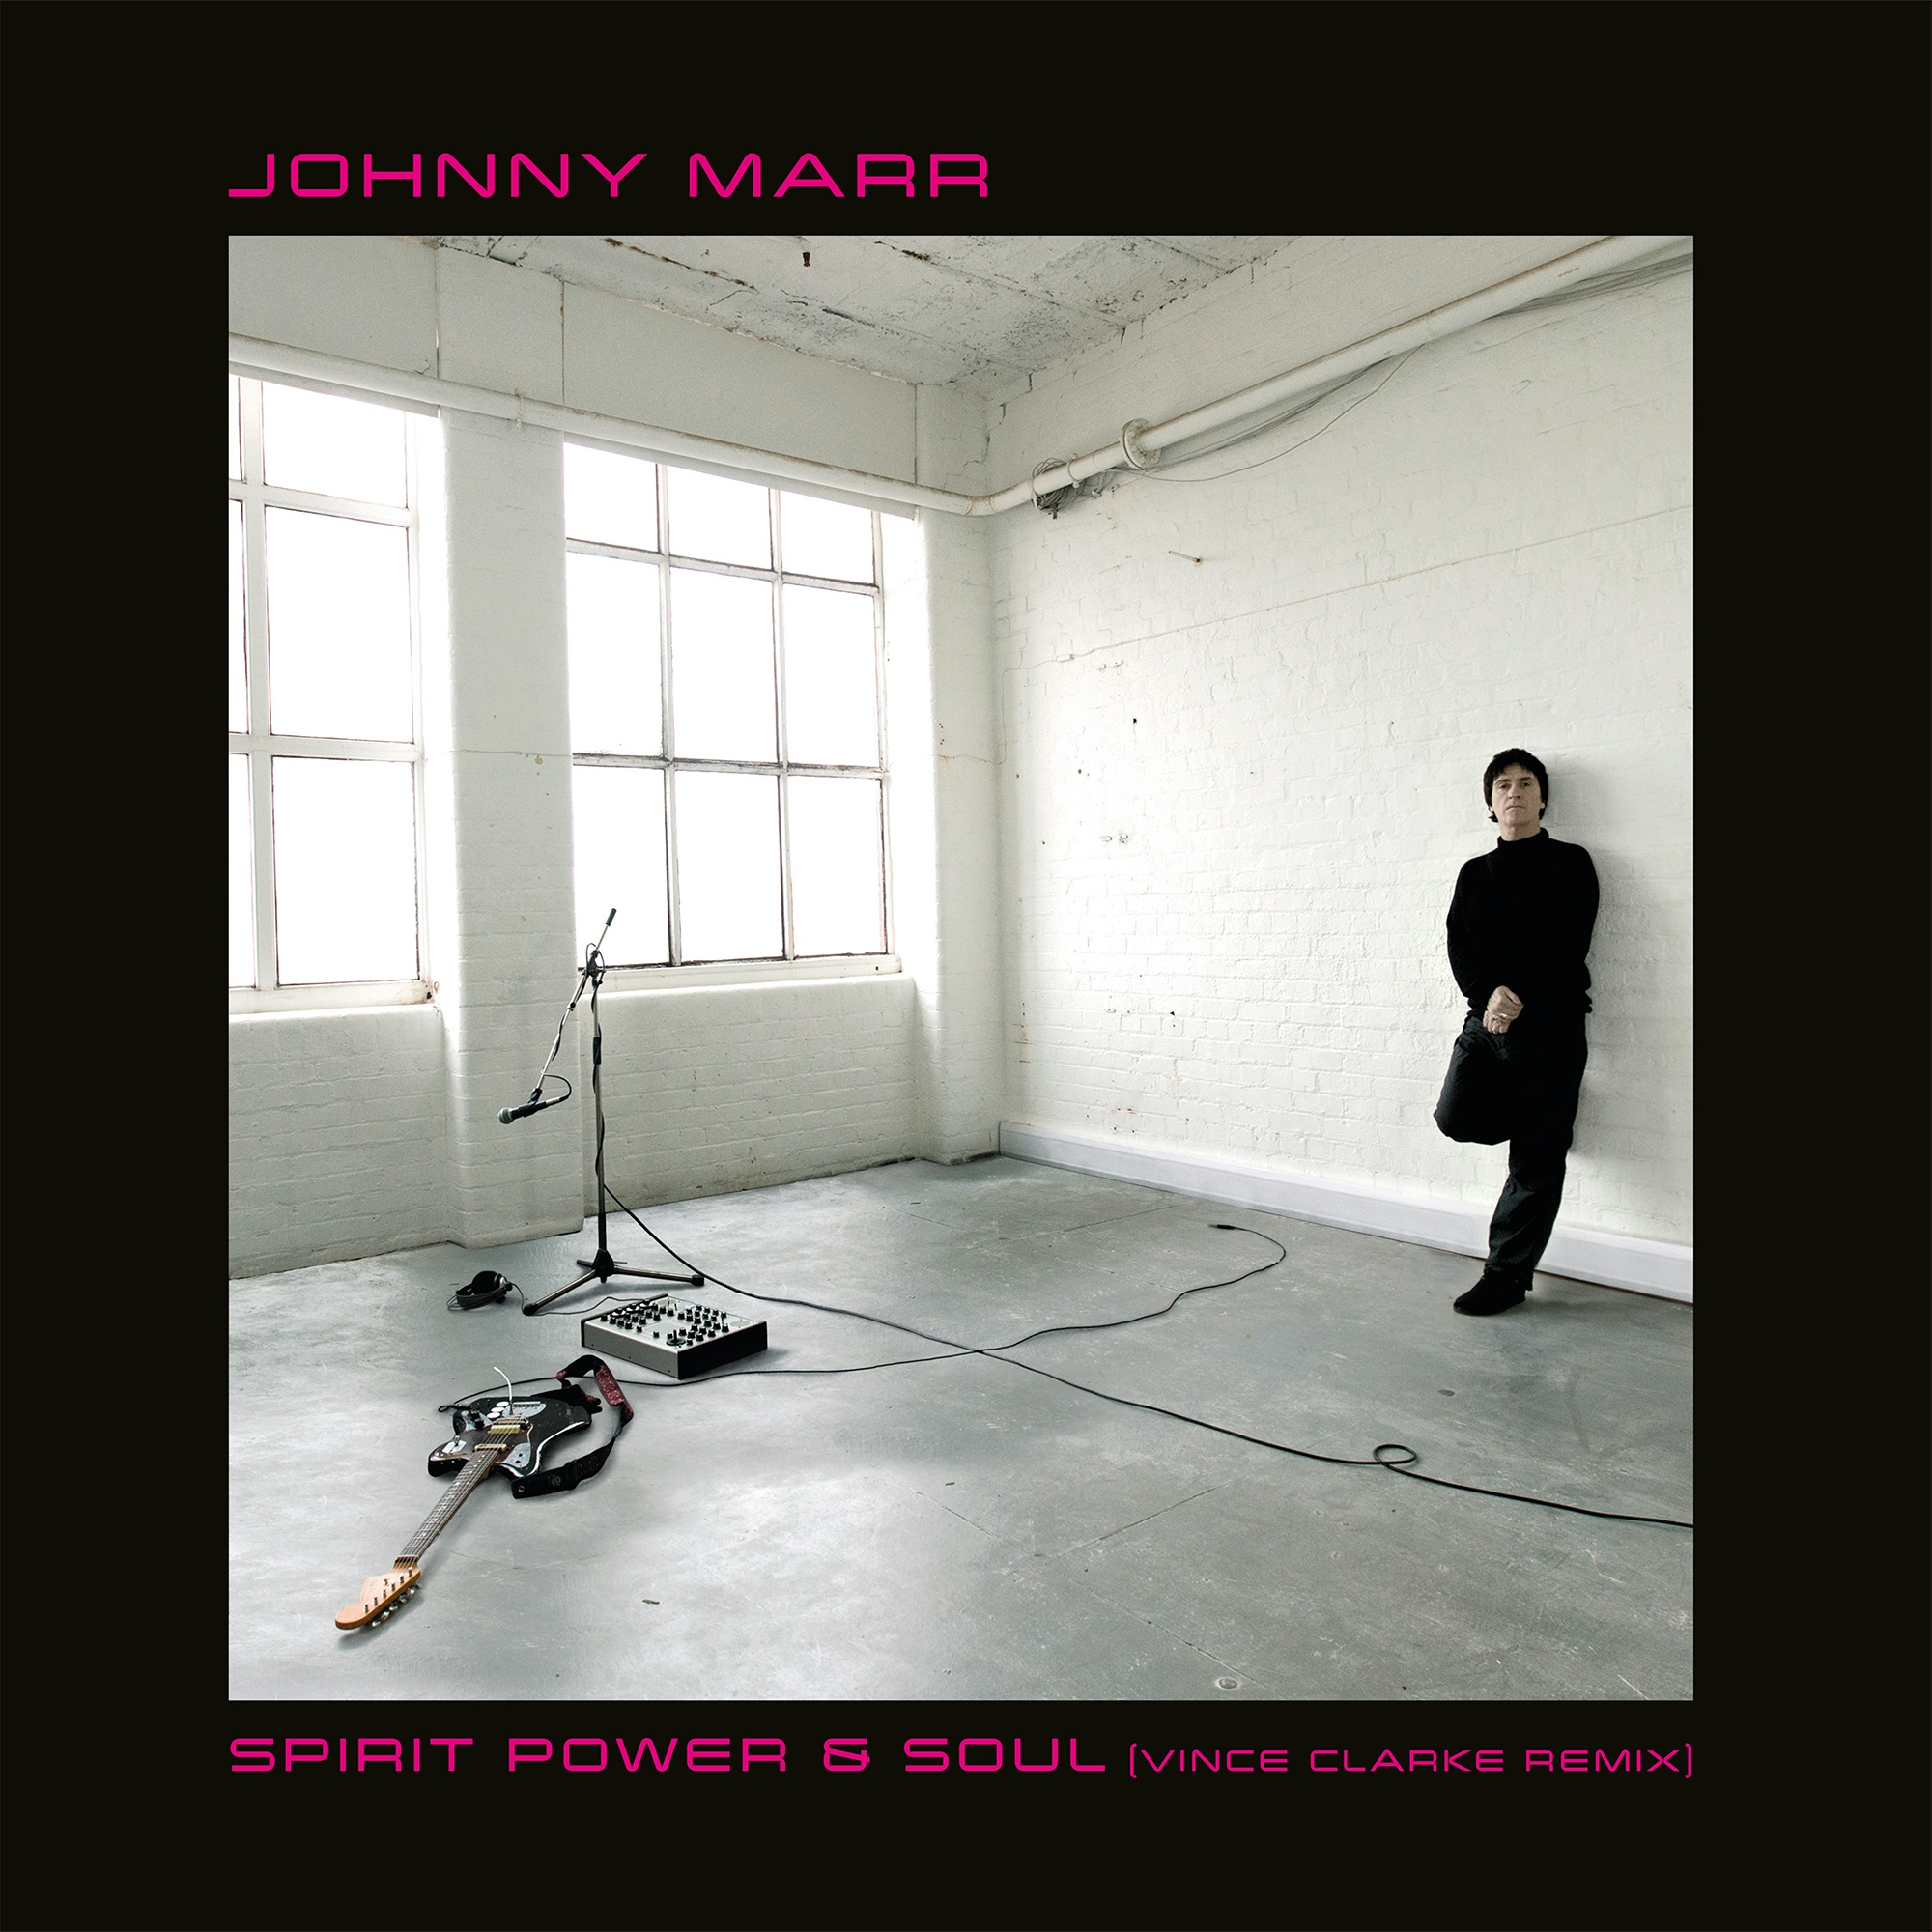 Album artwork for Album artwork for Spirit Power and Soul (Vince Clarke Remix) by Johnny Marr by Spirit Power and Soul (Vince Clarke Remix) - Johnny Marr